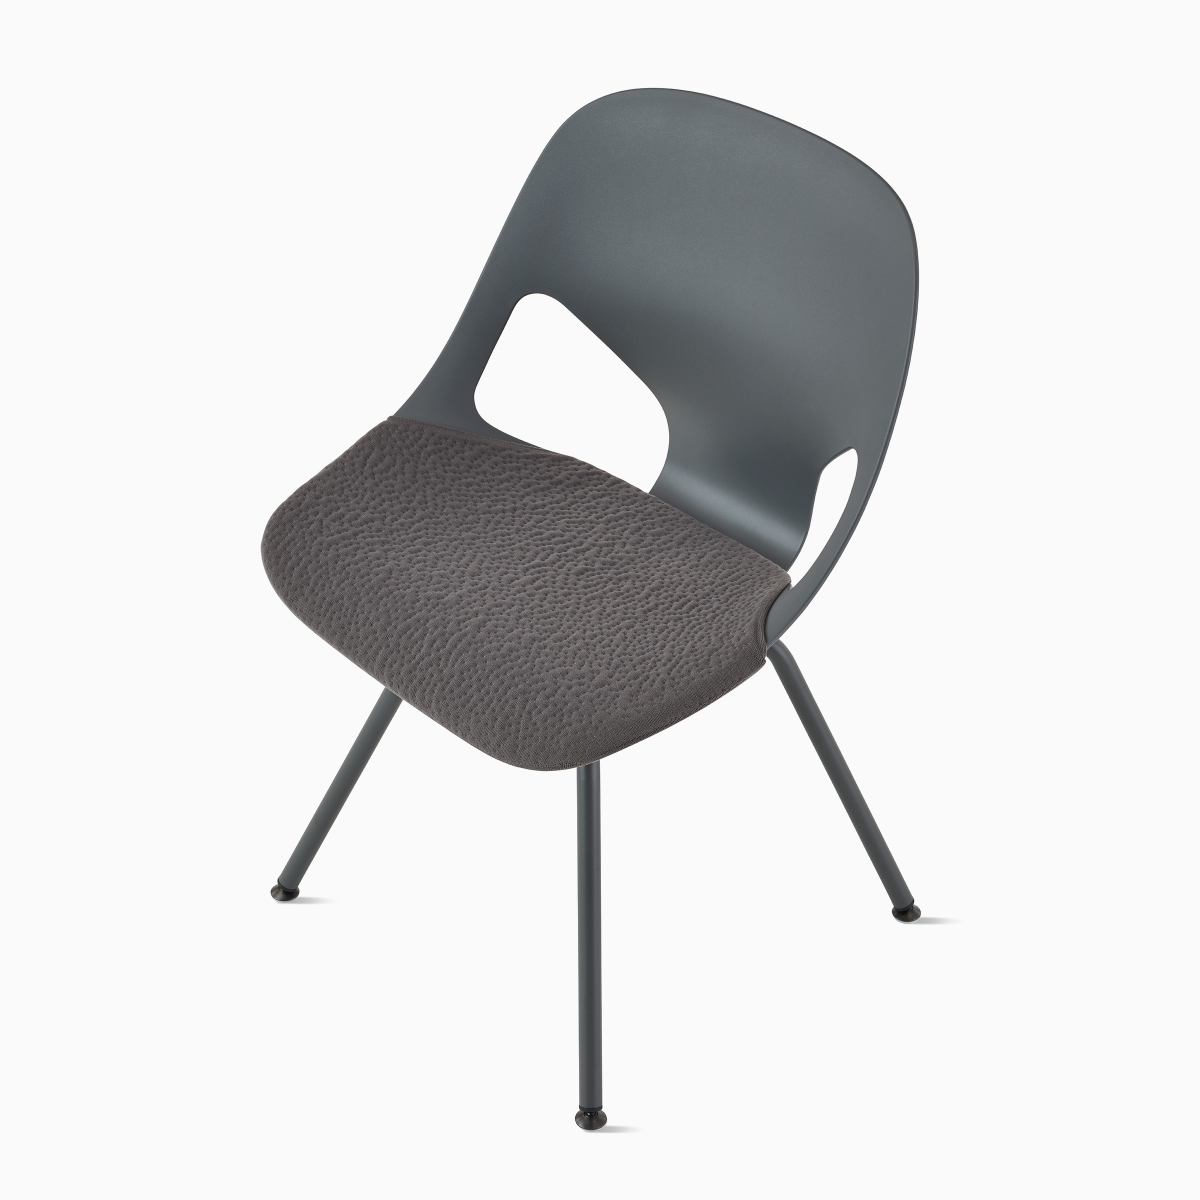 Top view of Zeph Side Chair in carbon with a carbon knit seat pad.